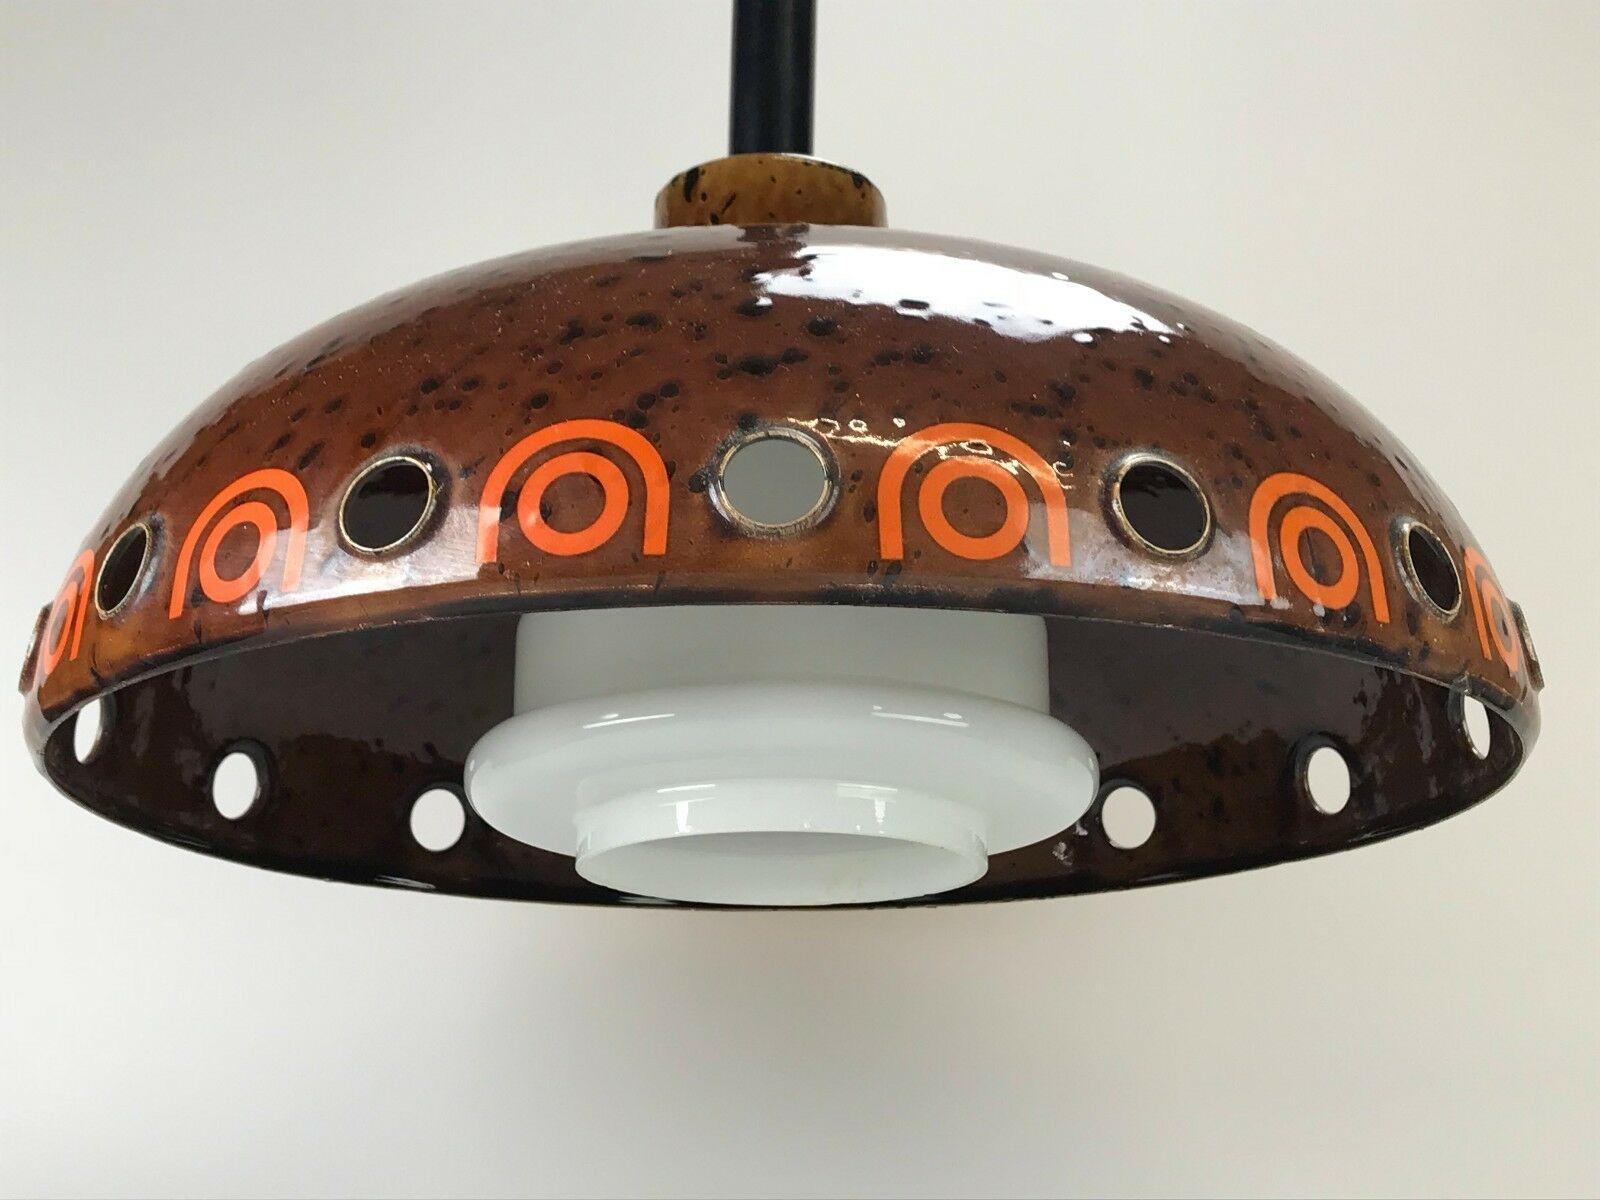 70s Hanging lamp ceiling lamp lamp light space age enamel glass Hustadt.

Object: lamp

Manufacturer: Hustadt lights

Condition: good

Age: around 1960-1970

Dimensions:

Diameter = 39cm
Hanging height = 60cm

Other notes:

The